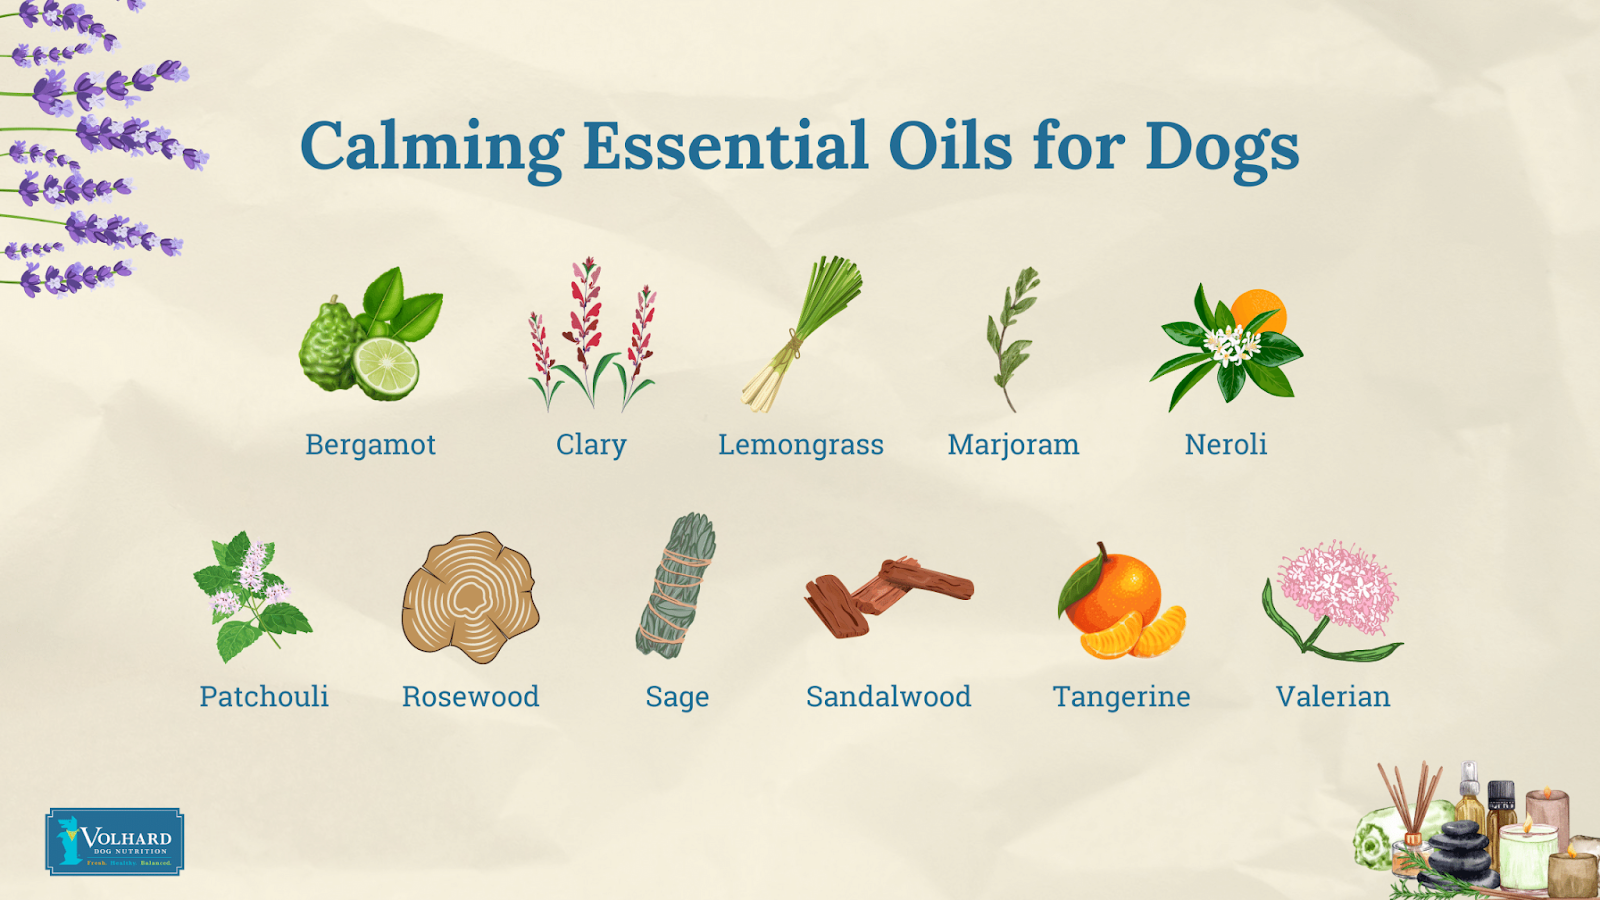 Calming essential oils for dogs